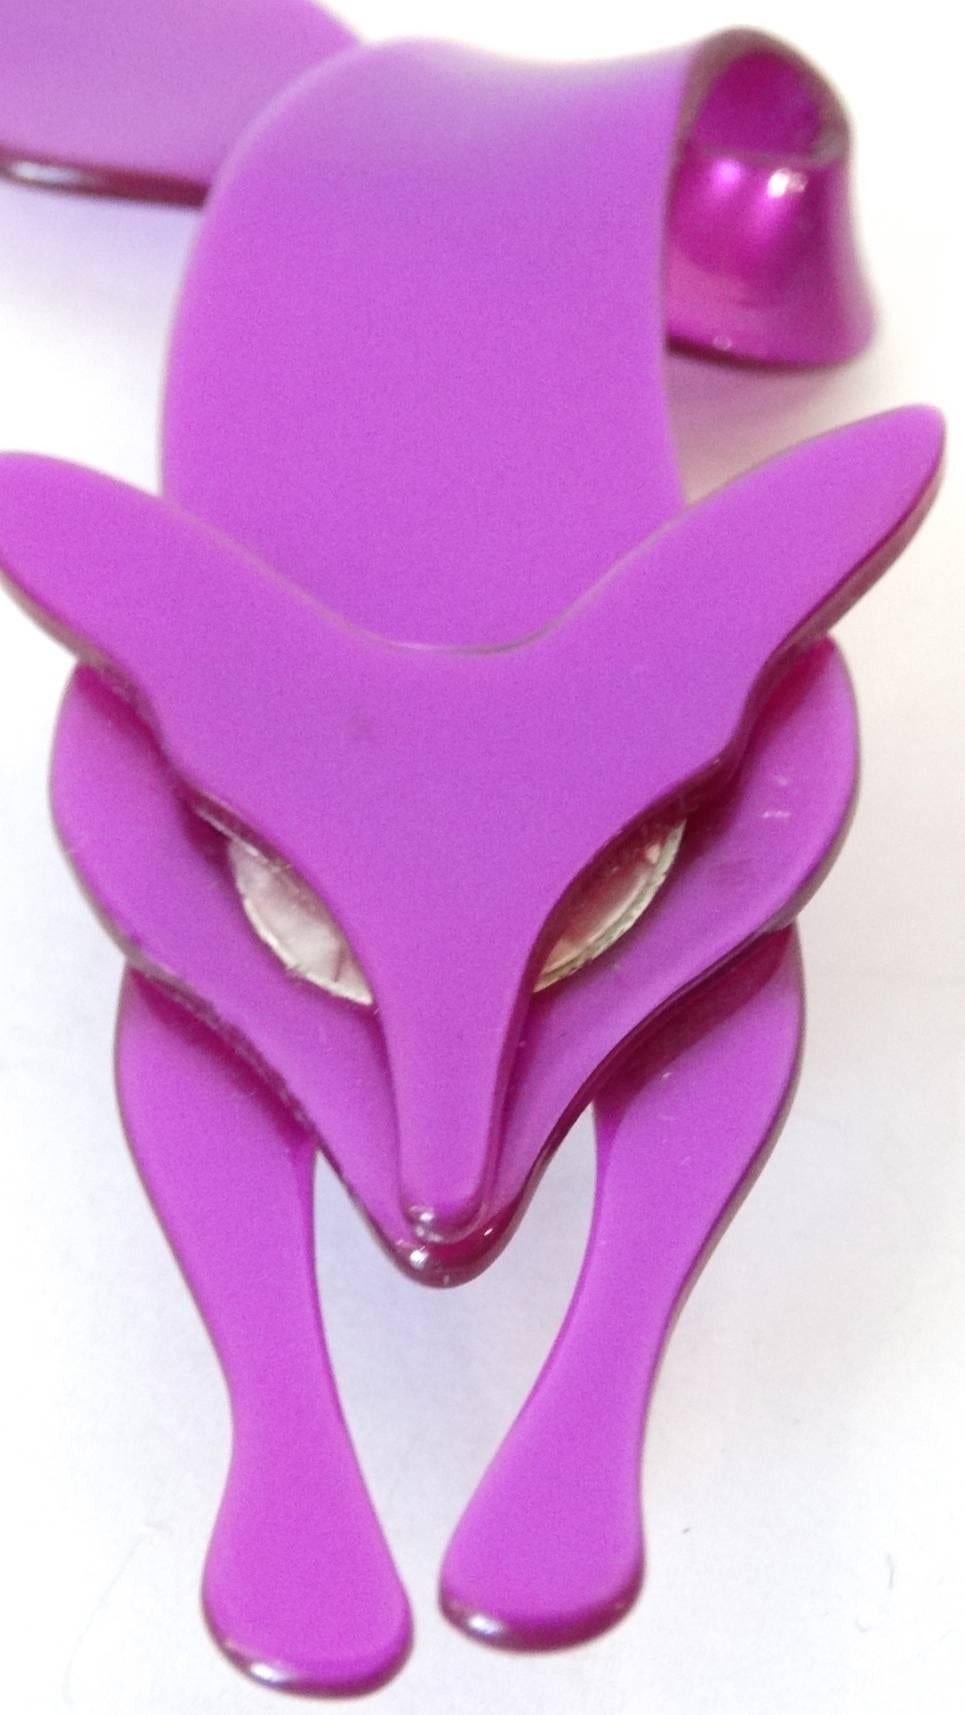 Are you the Foxiest of them all? Beautiful Fox pin/brooch Designed by French artist Lea Stein, this vintage, one-of-a-kind crawling fox dates to the late 1970's.The perfect fashion addition in Foxy Iridescent Magenta with Silver Eyes 100% celluloid